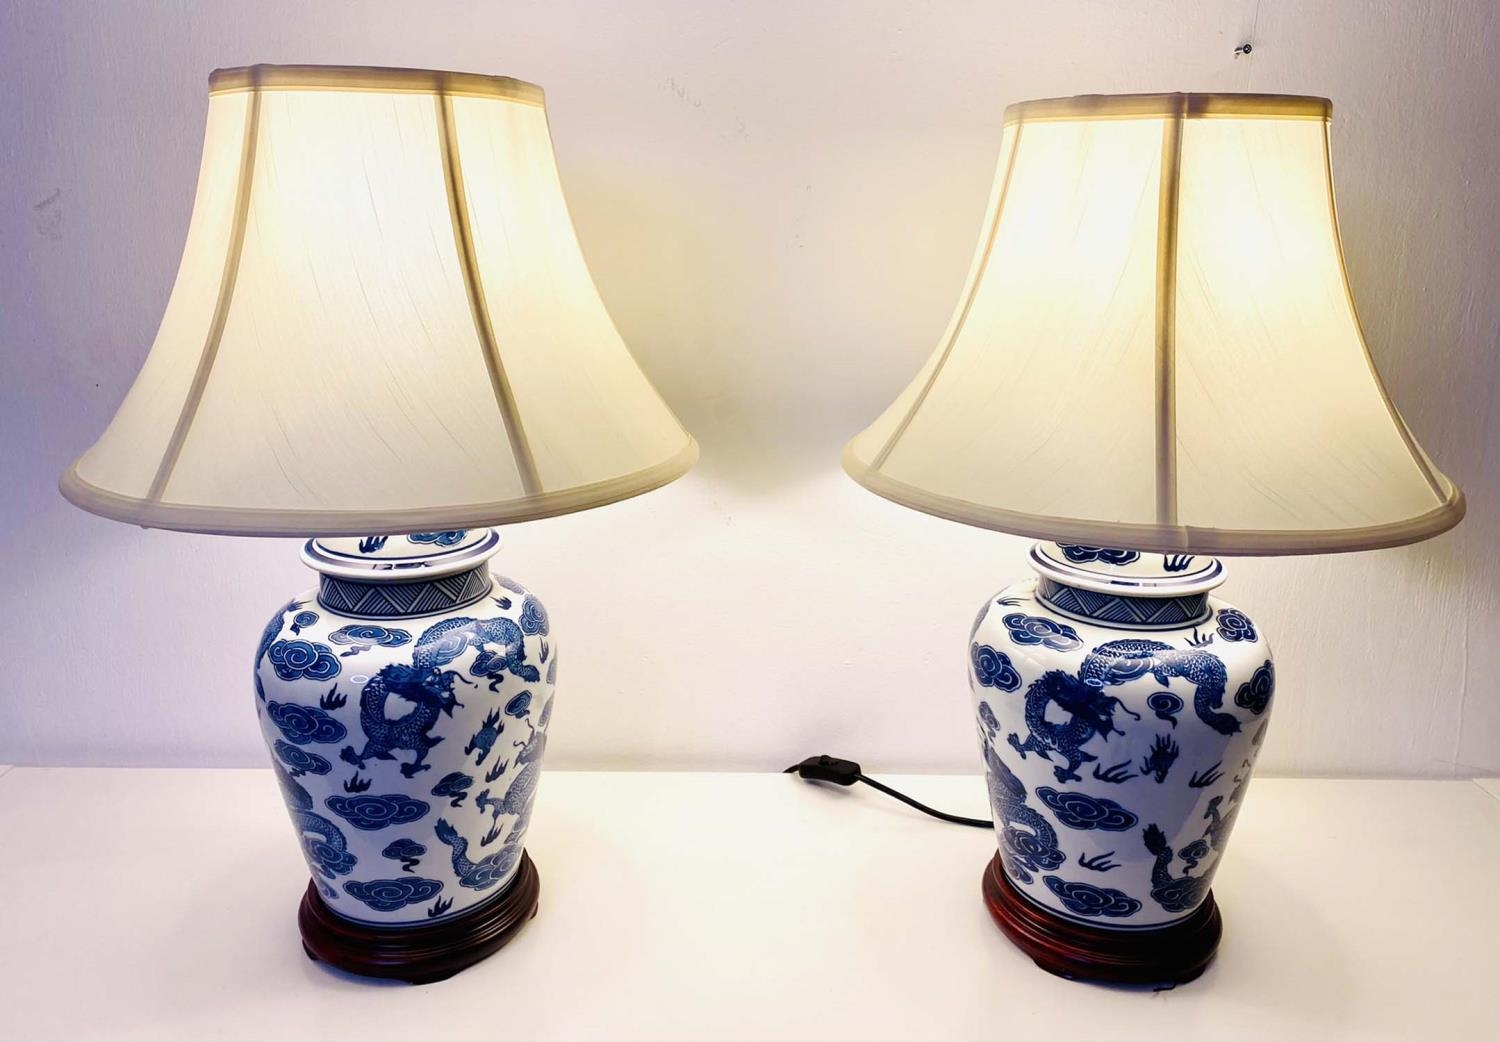 TABLE LAMPS, pair, 60cm H x 40cm diam., Chinese export style blue and white ceramic, neutral